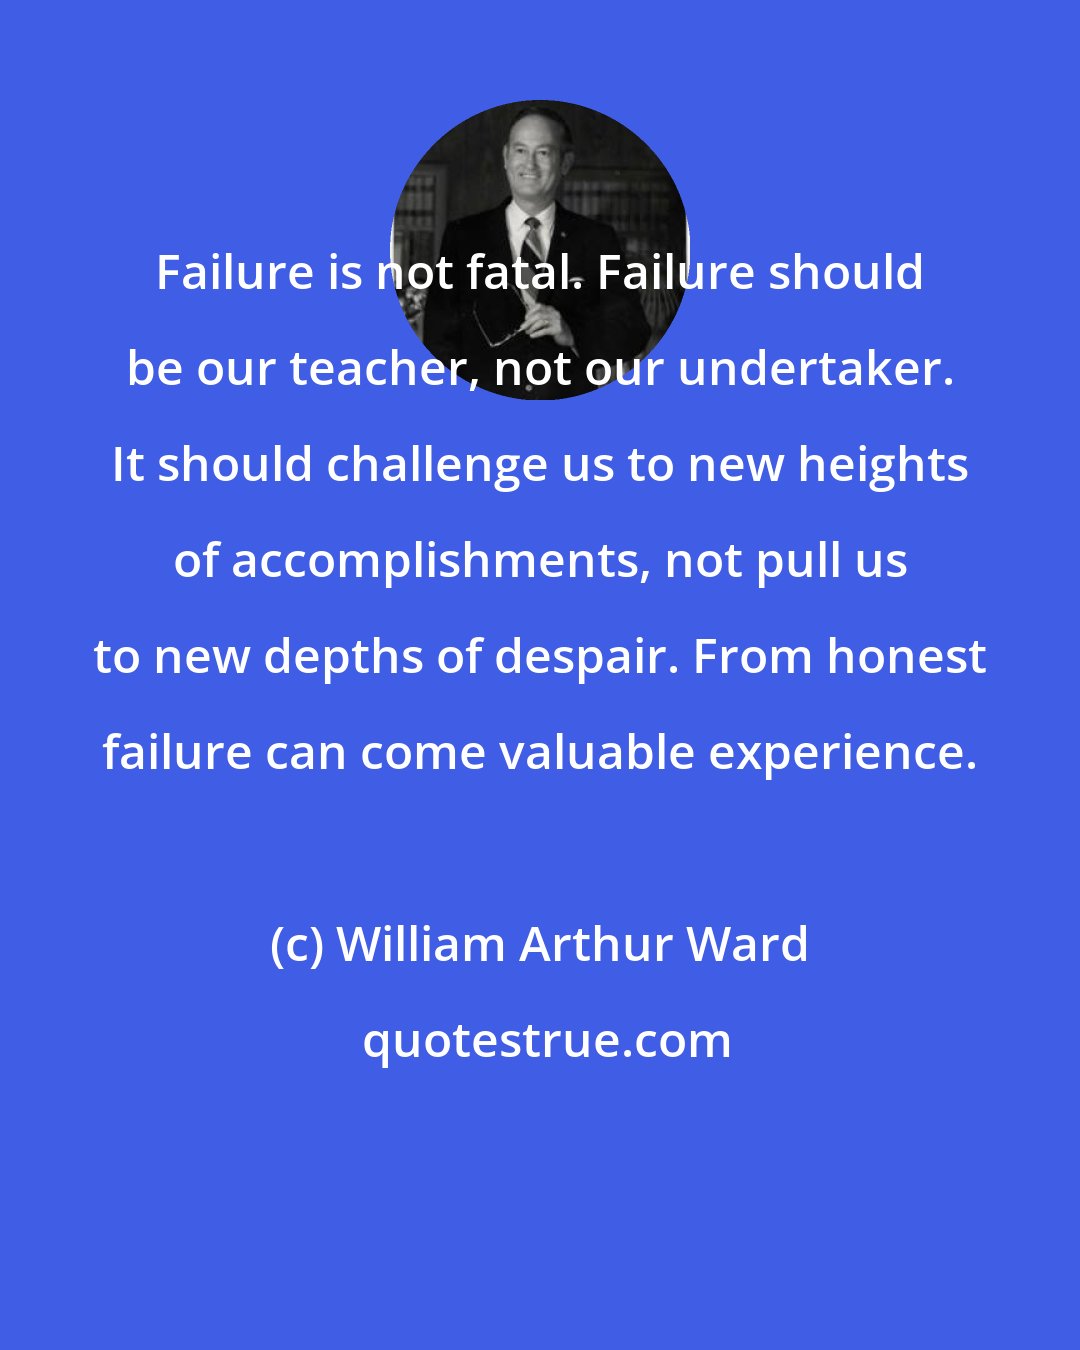 William Arthur Ward: Failure is not fatal. Failure should be our teacher, not our undertaker. It should challenge us to new heights of accomplishments, not pull us to new depths of despair. From honest failure can come valuable experience.